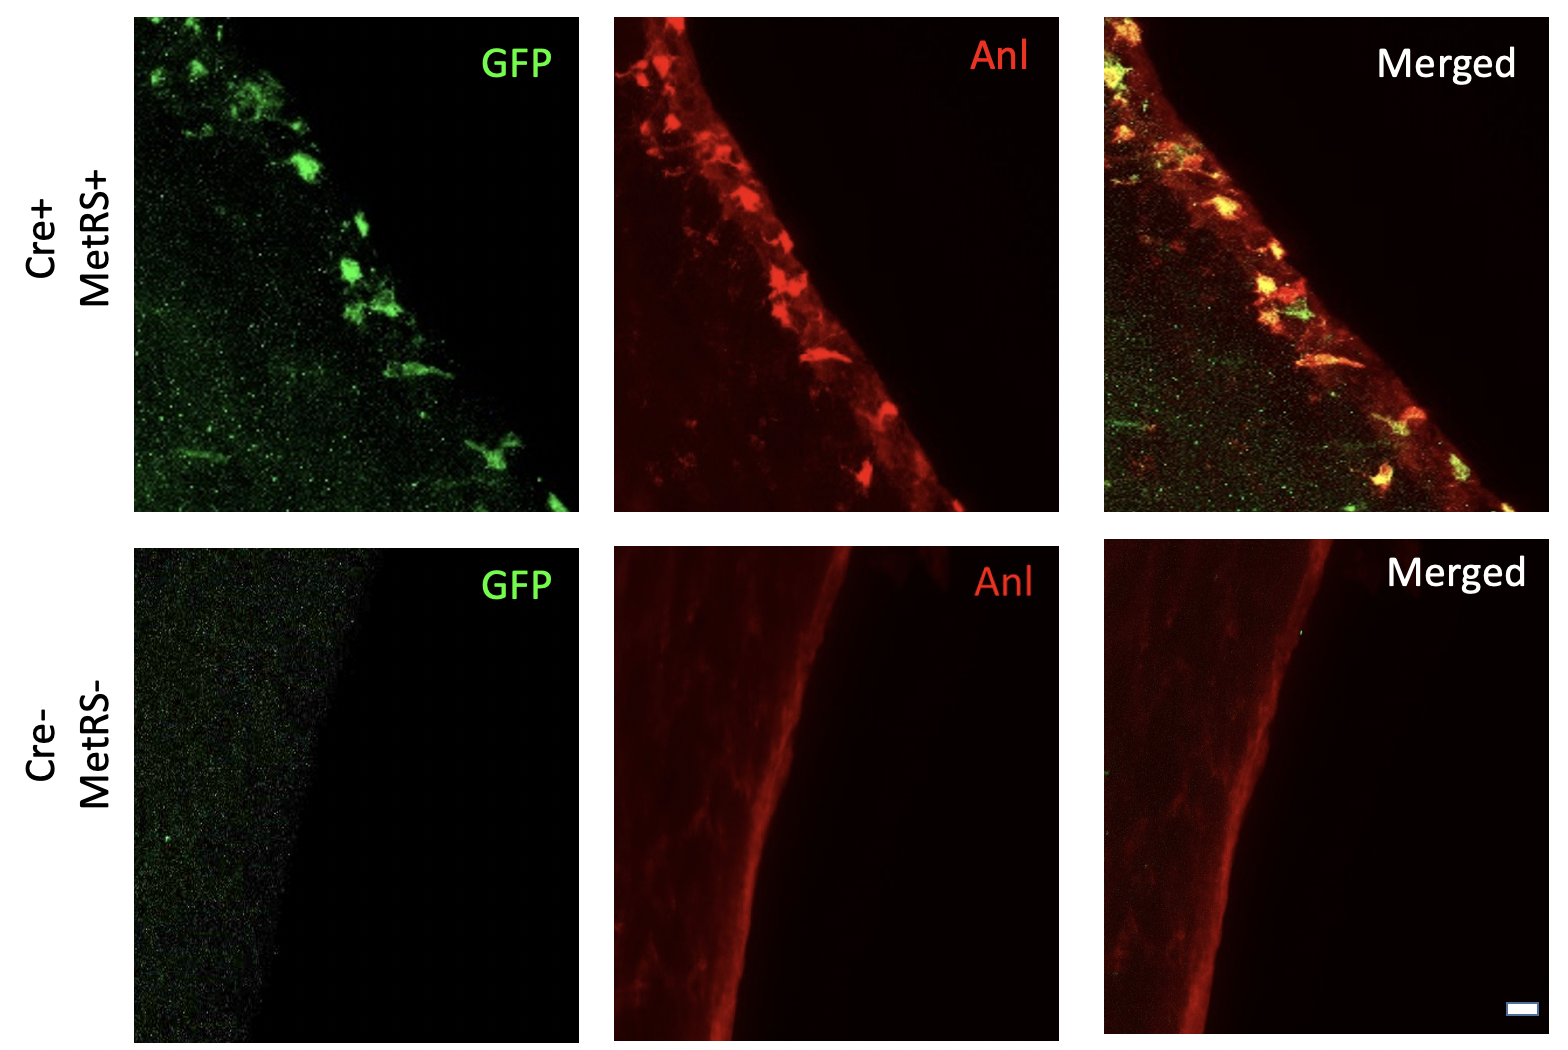 immunofluorescence imaging of anl-tagged proteins in GFP+ cells in the subventricular zone